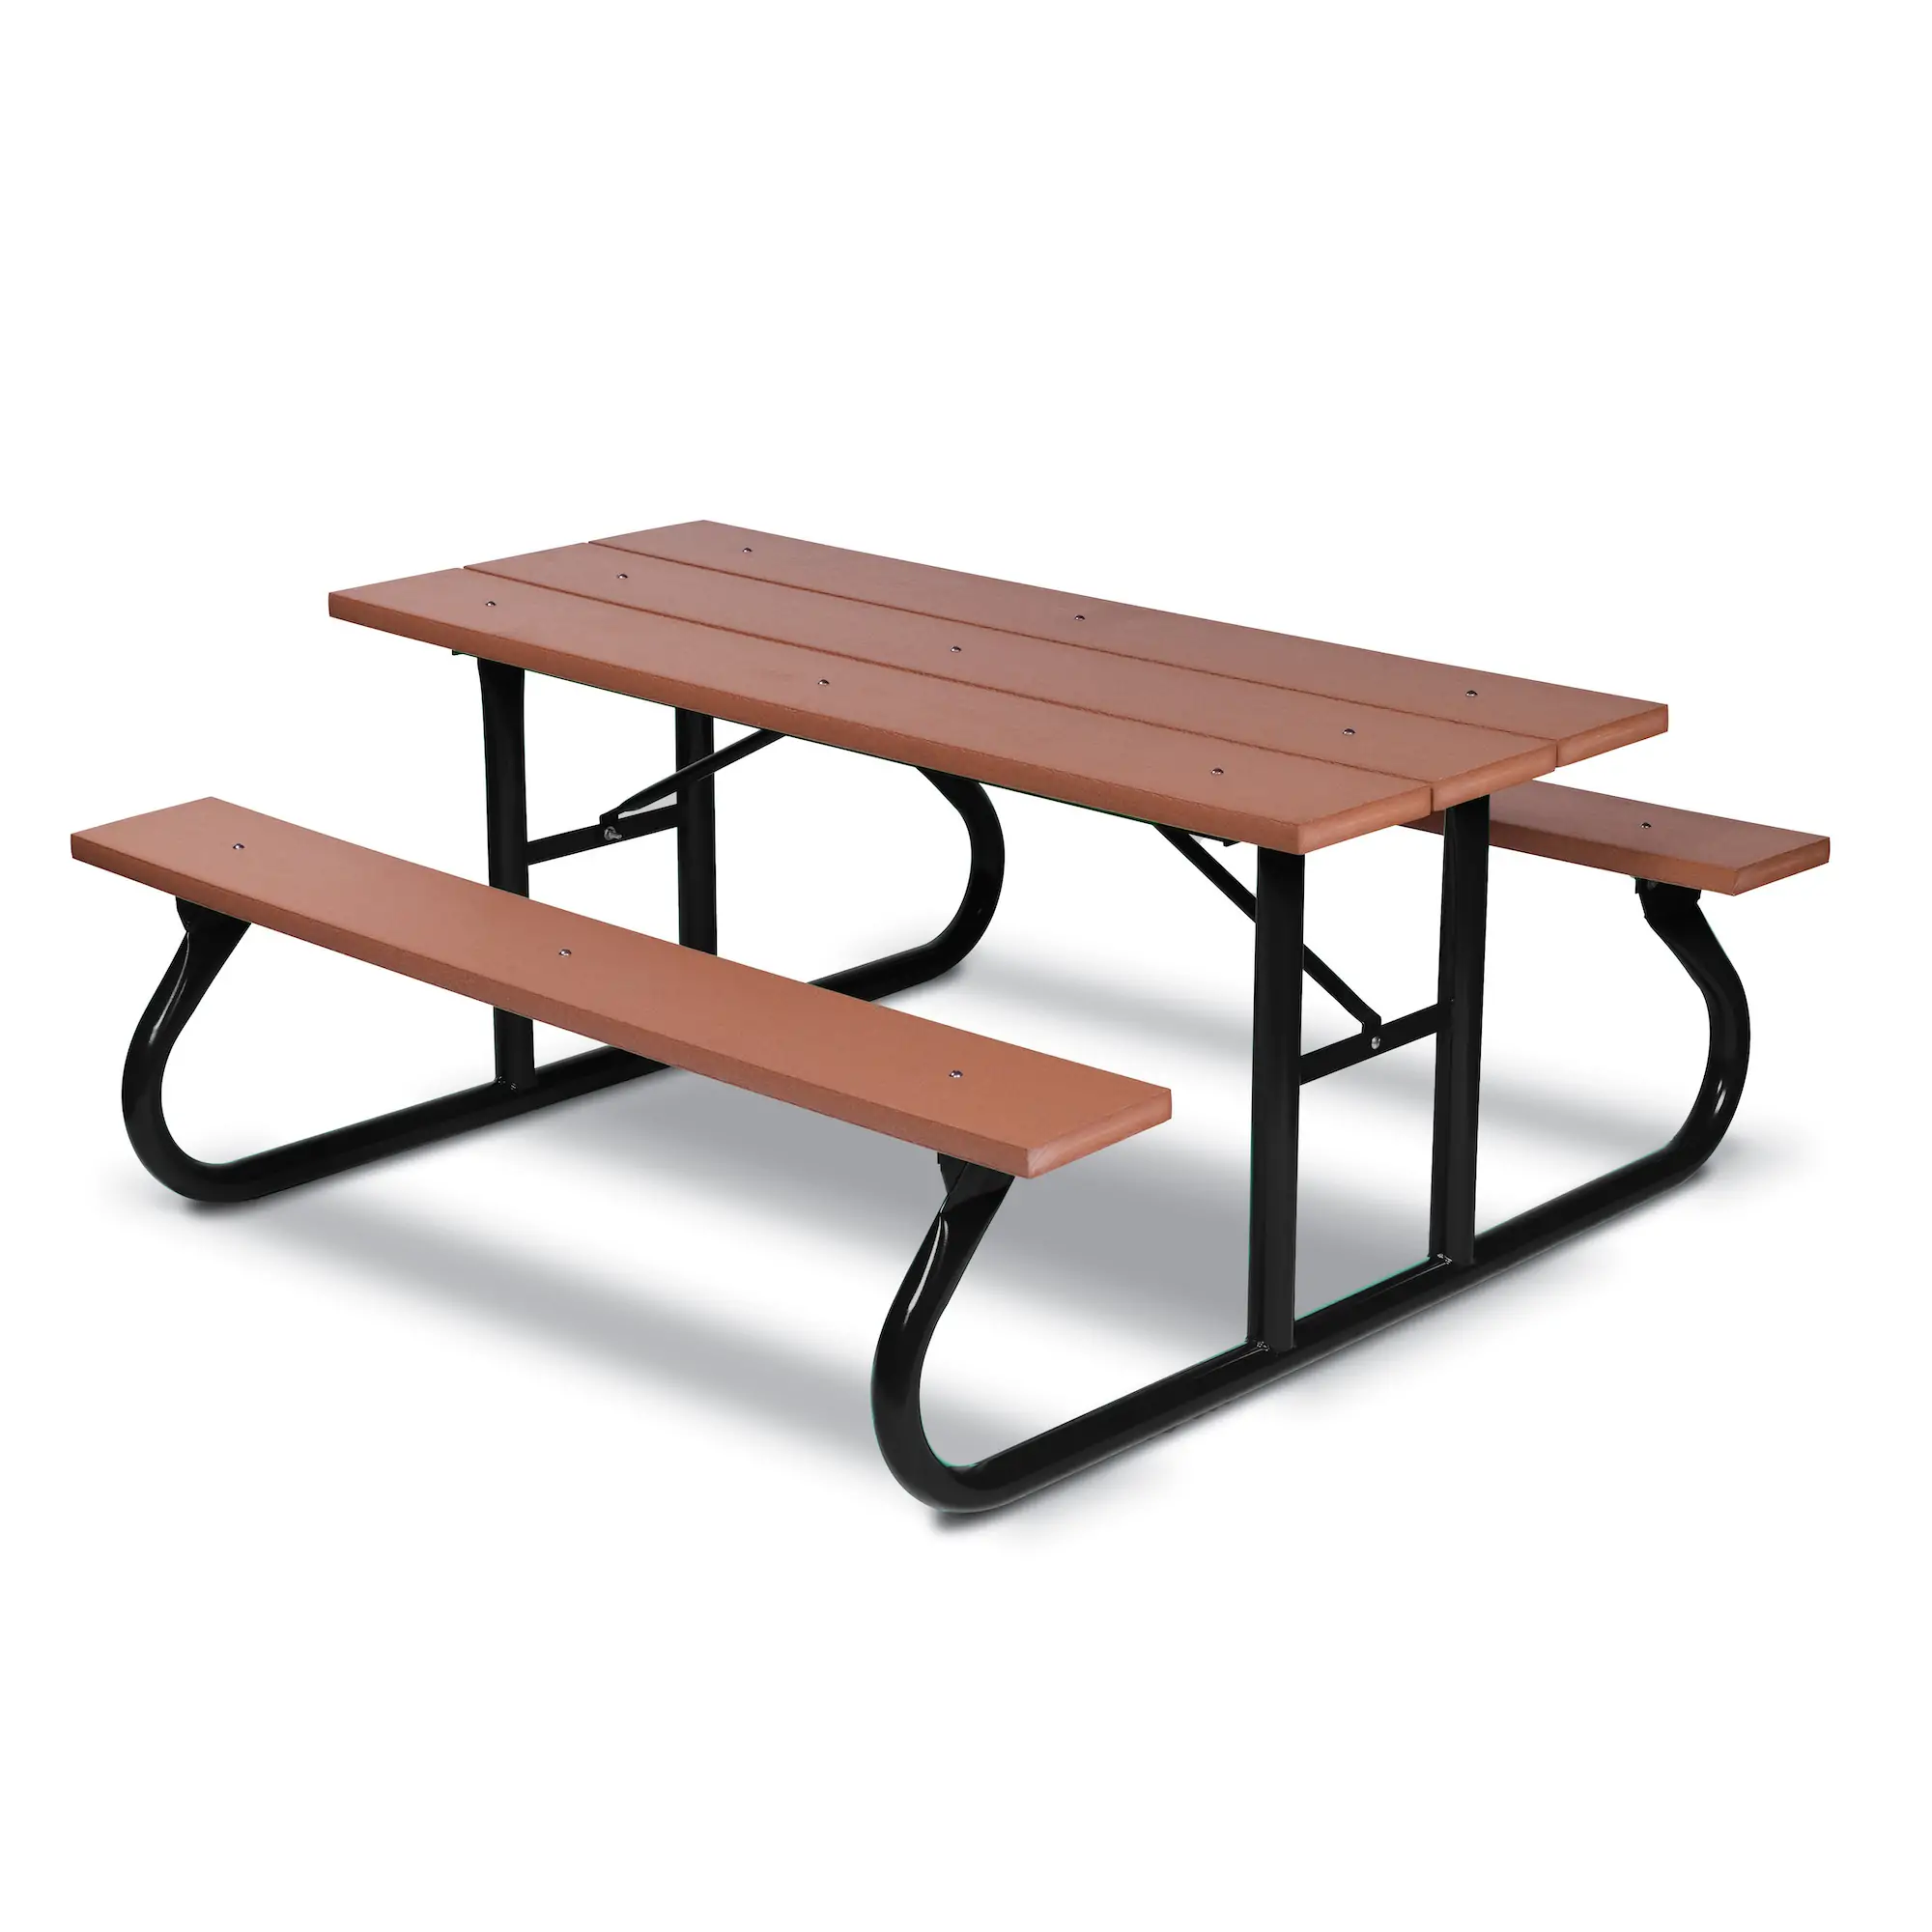 prepare Counting insects over there 6' & 8' Picnic Tables | Green Valley Portable | Wabash